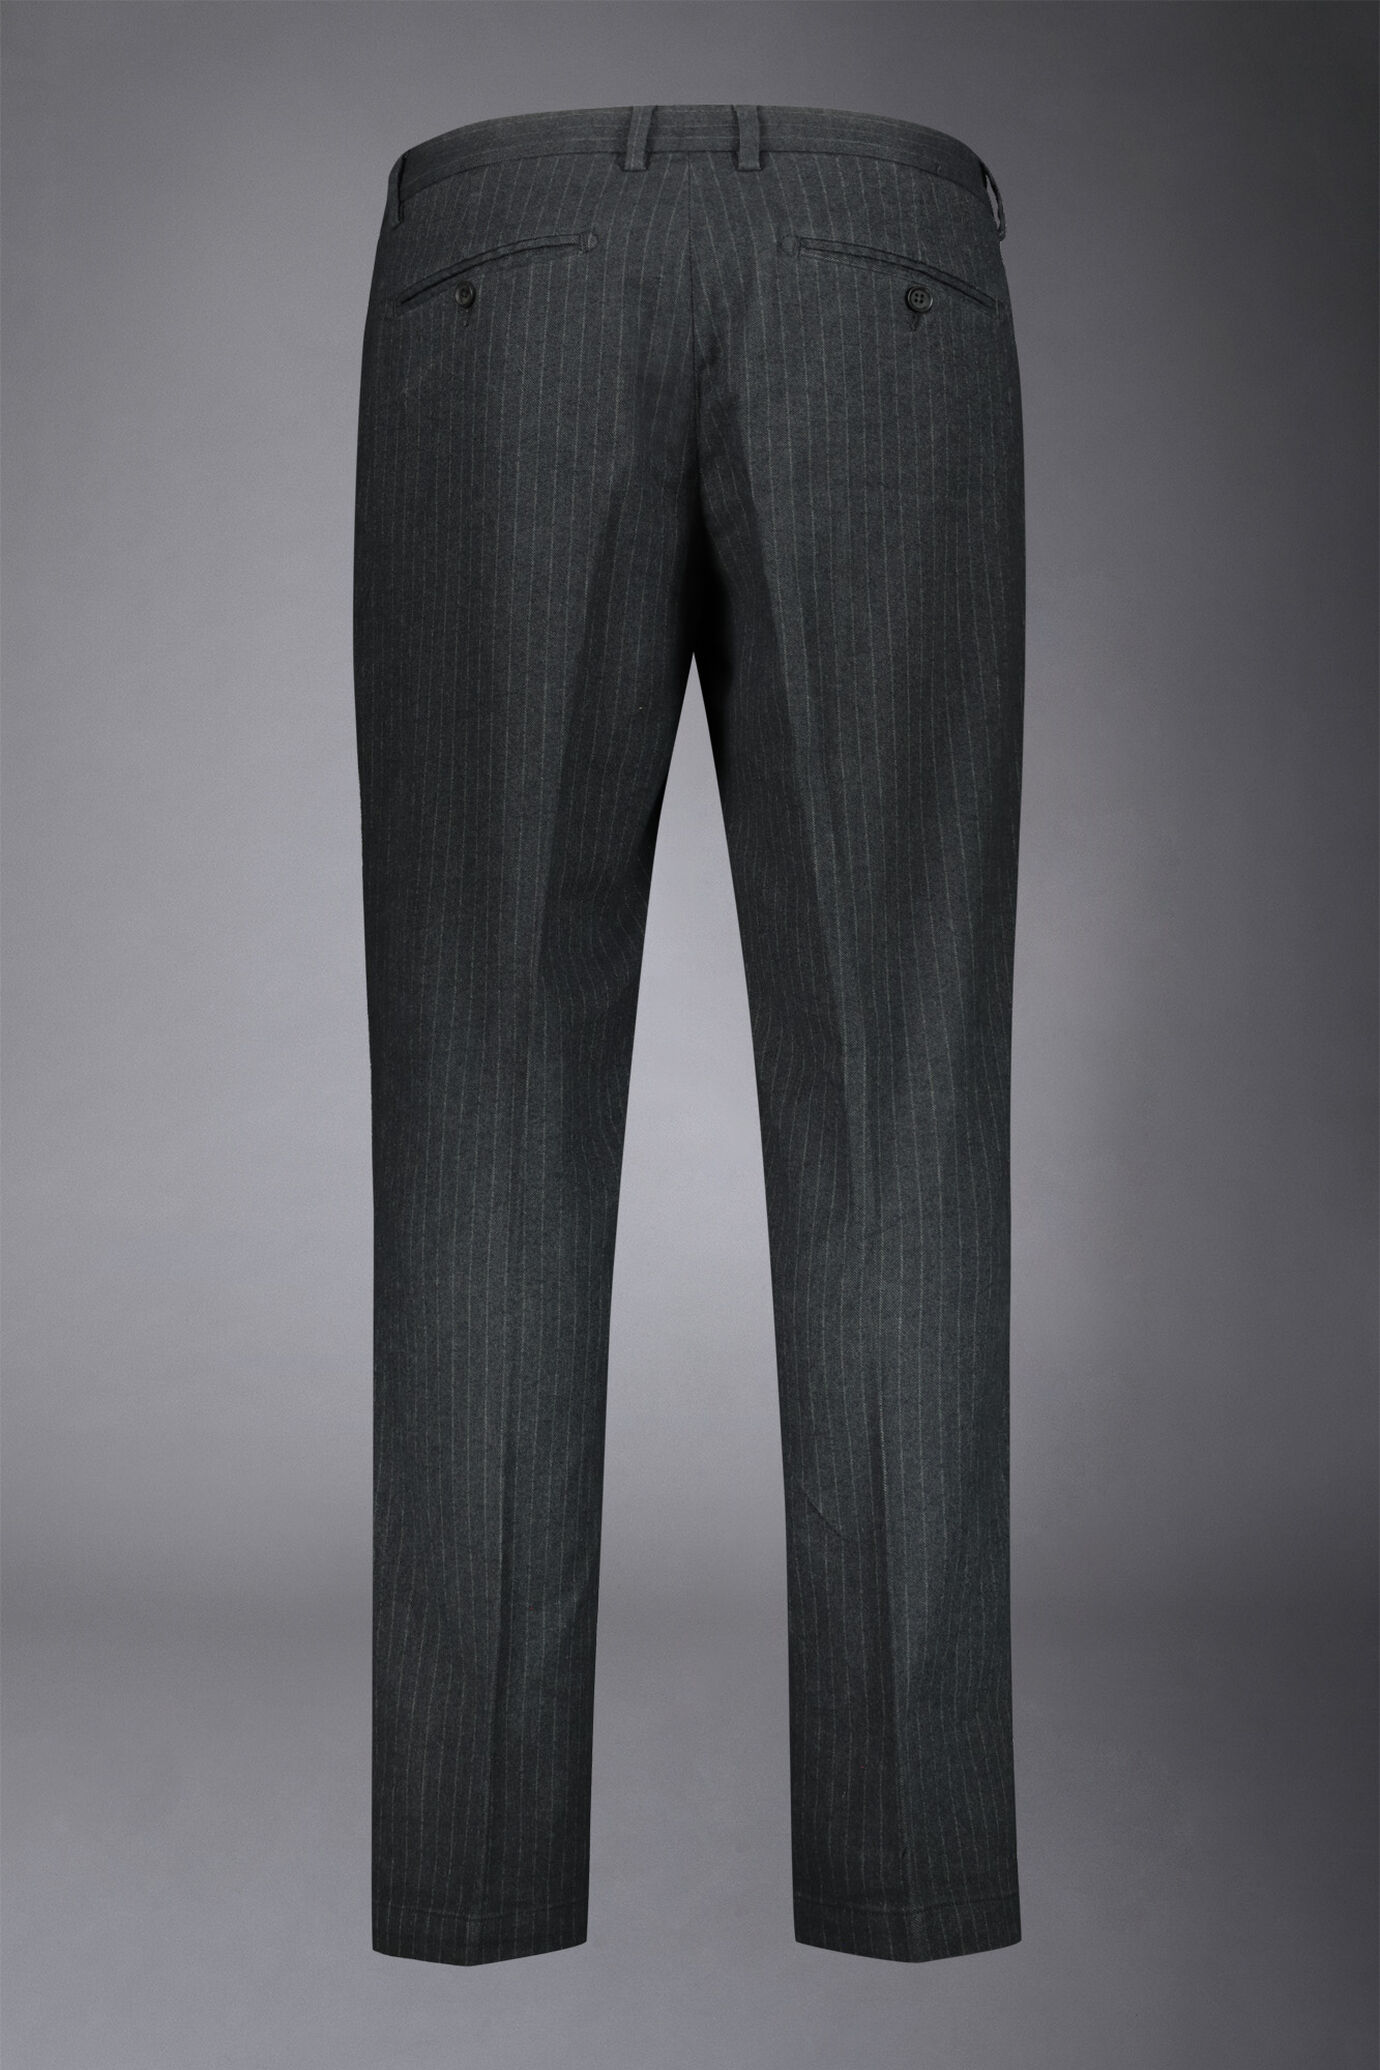 Men's chino pants woven cotton hand wool pinstripe comfort fit image number 5